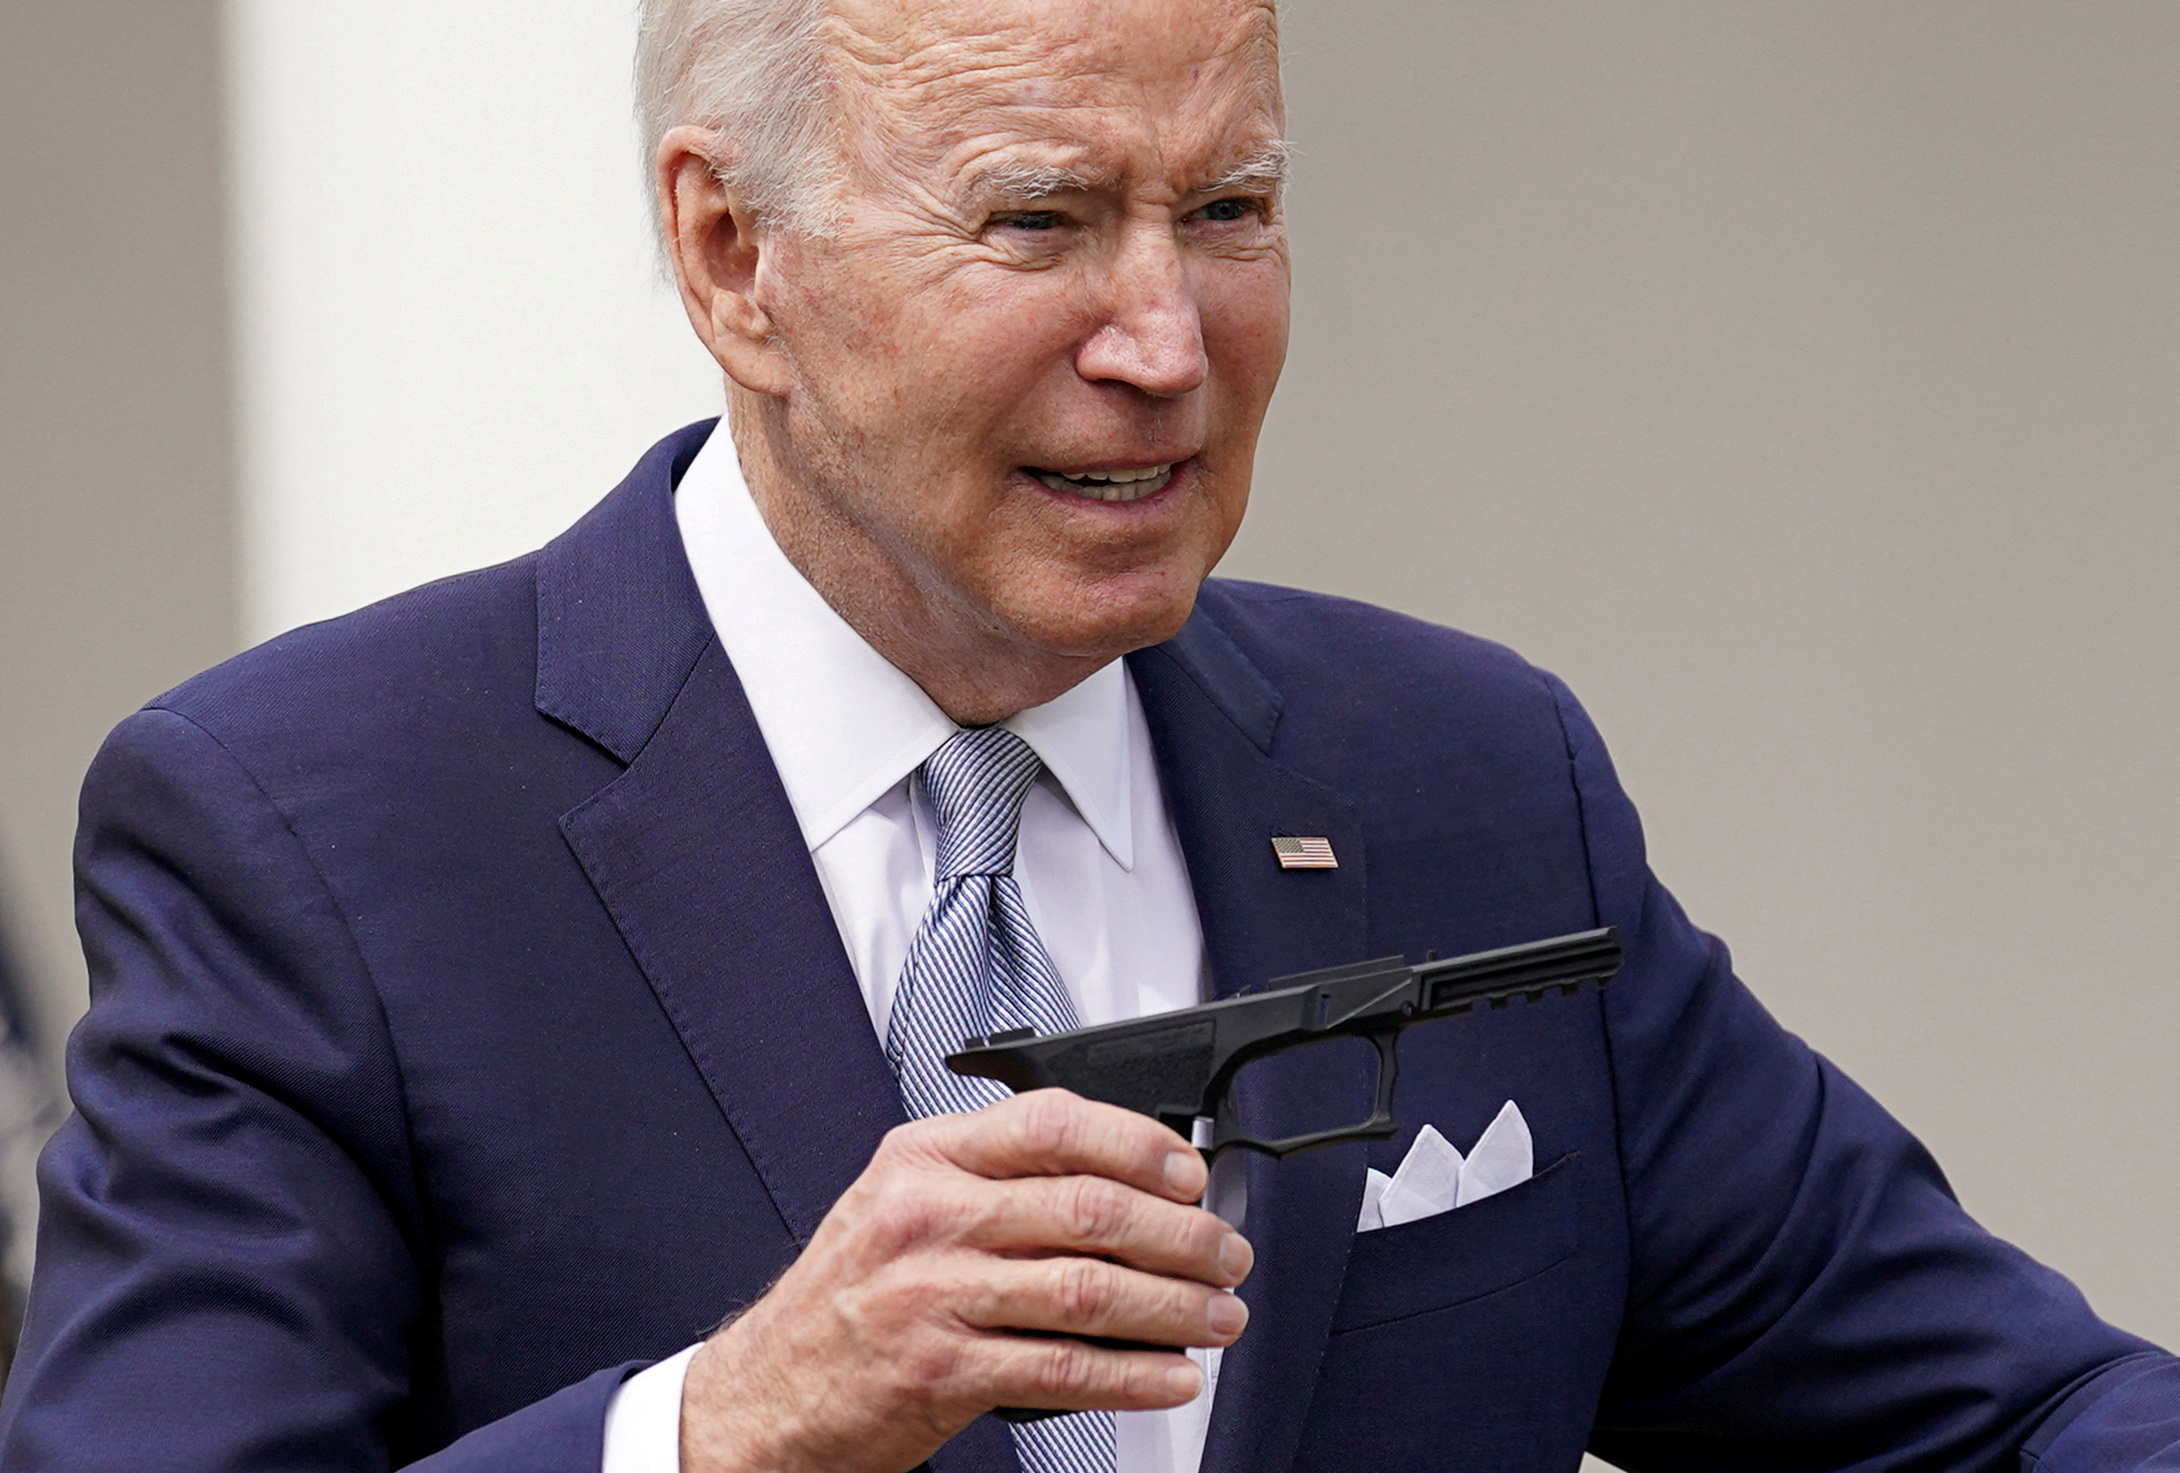 Biden issues executive order to expand background checks for gun purchases  | Reuters